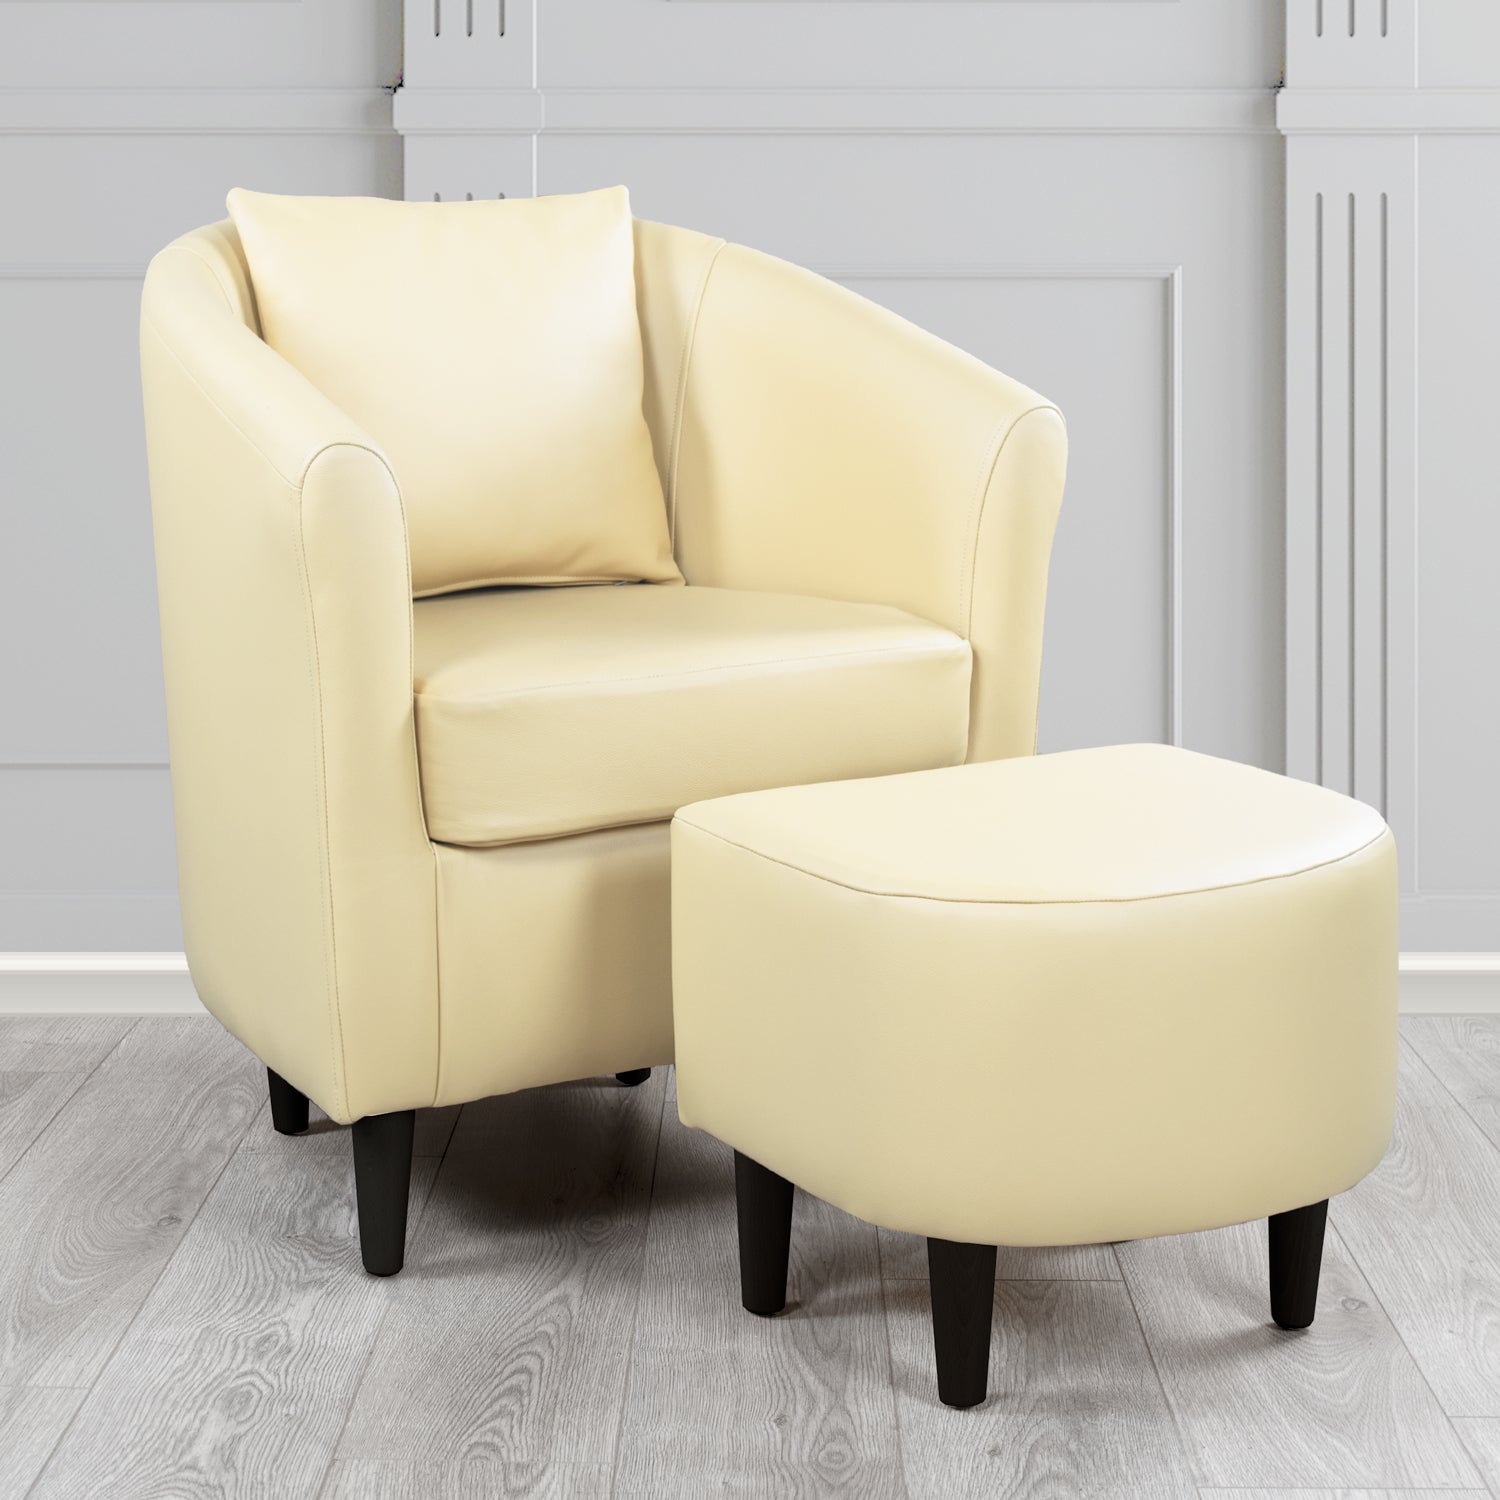 St Tropez Shelly Cream Crib 5 Genuine Leather Tub Chair & Footstool Set With Scatter Cushion (6619473149994)